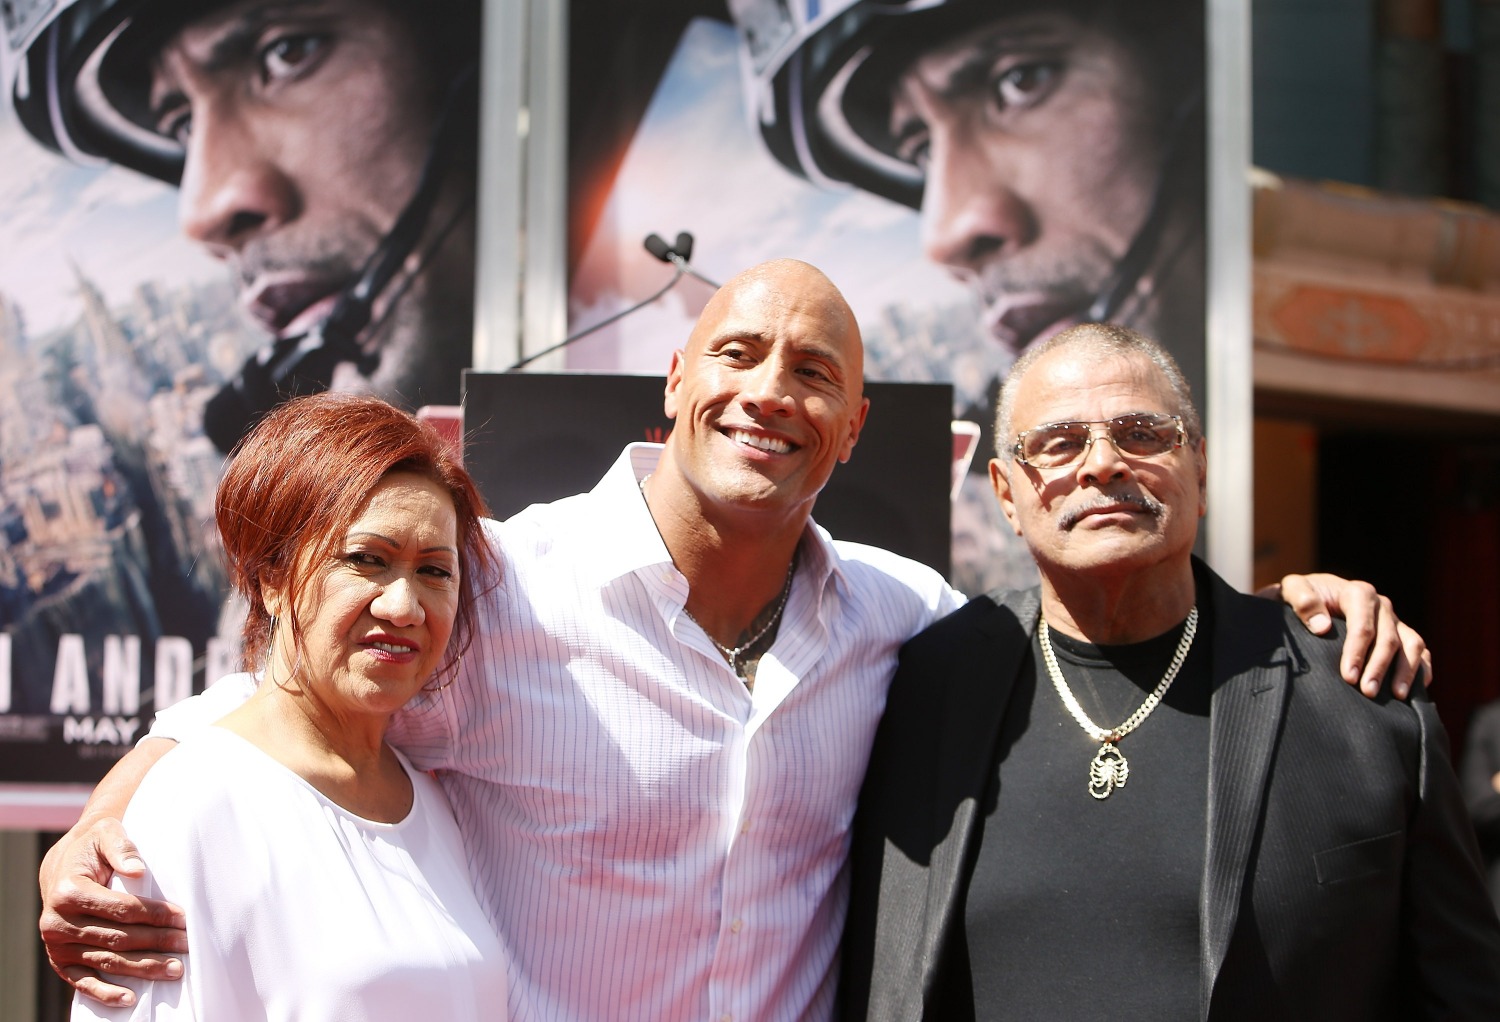 WWE superstar The Rock suffered a devastating loss with the tragic death of his father, Rocky Johnson.